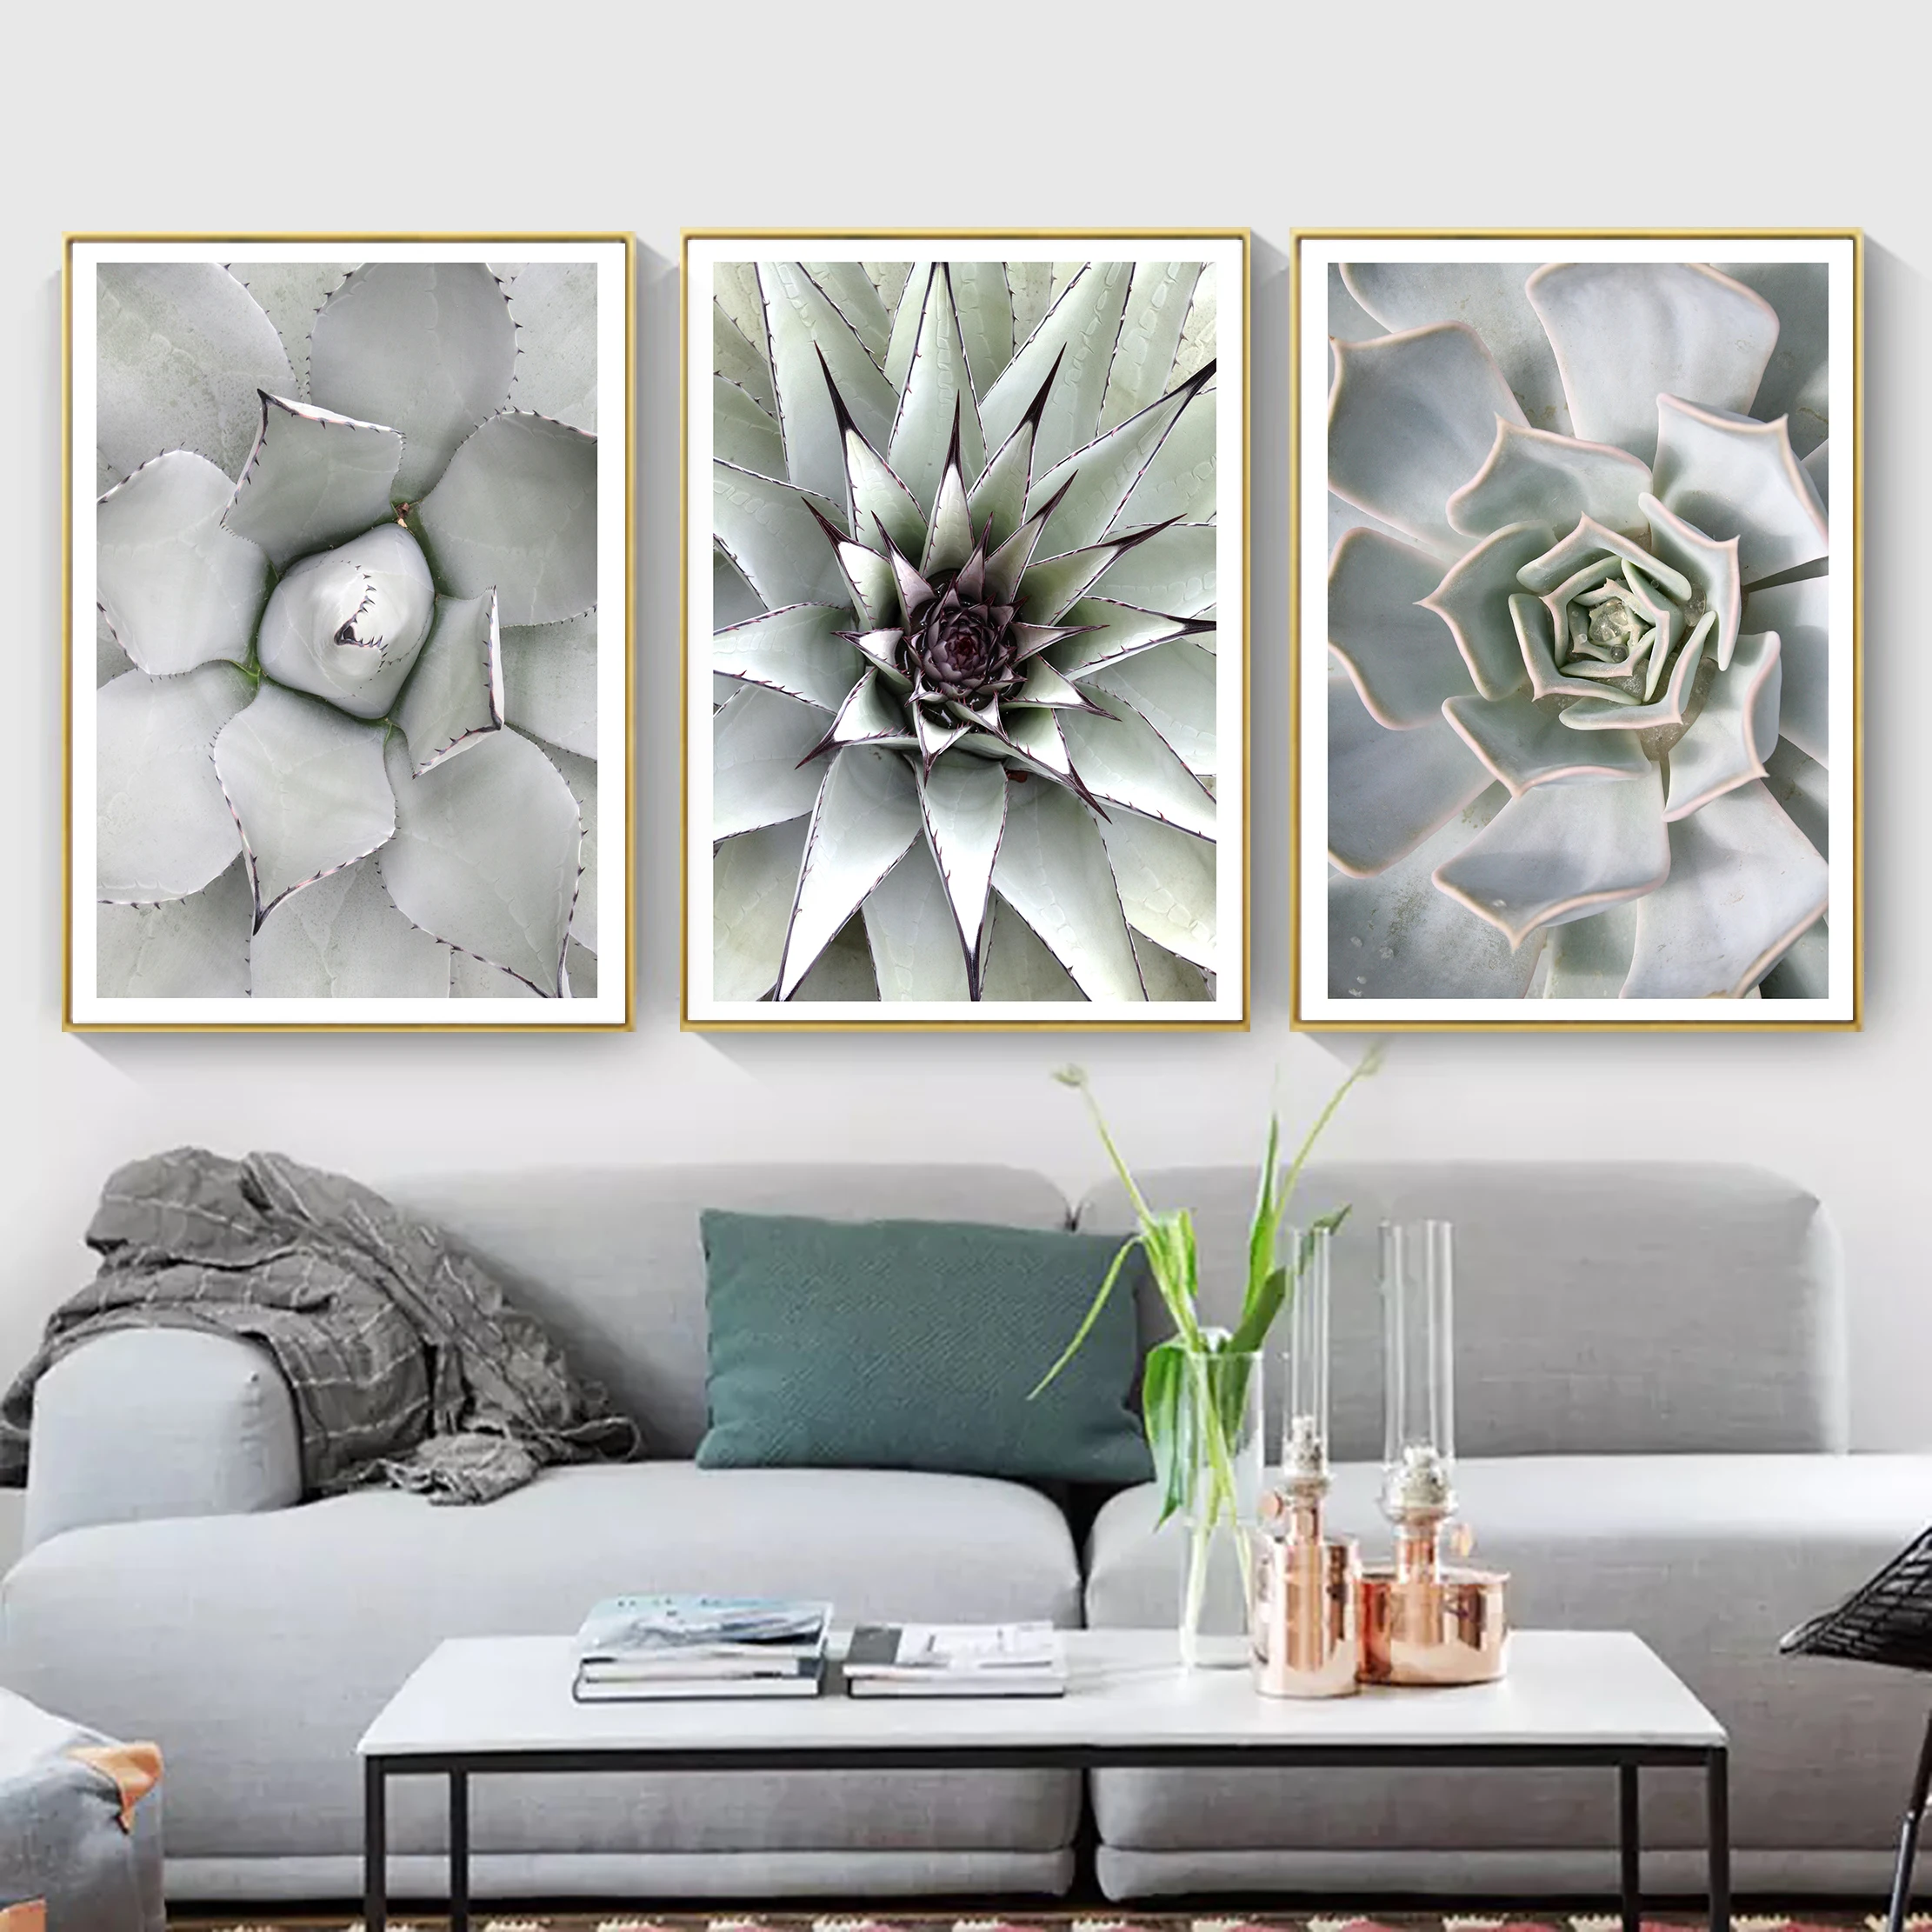 

Cactus More Meat Posters and Print Nordic Canvas Painting Home Decor Plant Decor Unframed Wall Art Picture For Living Room Home